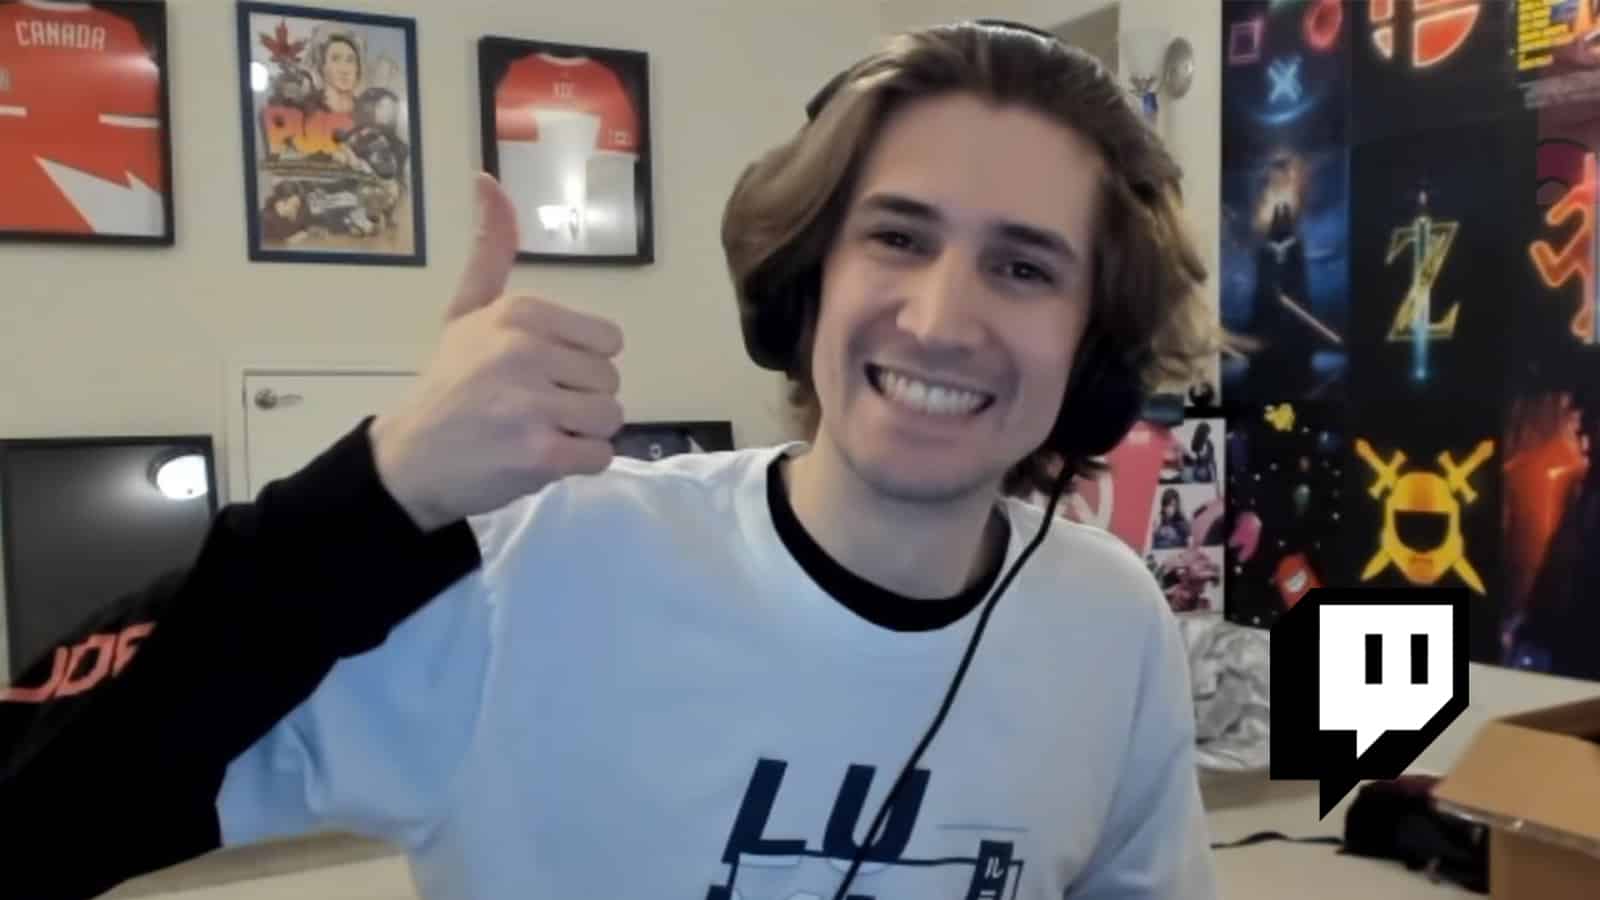 xqc thumbs up smile